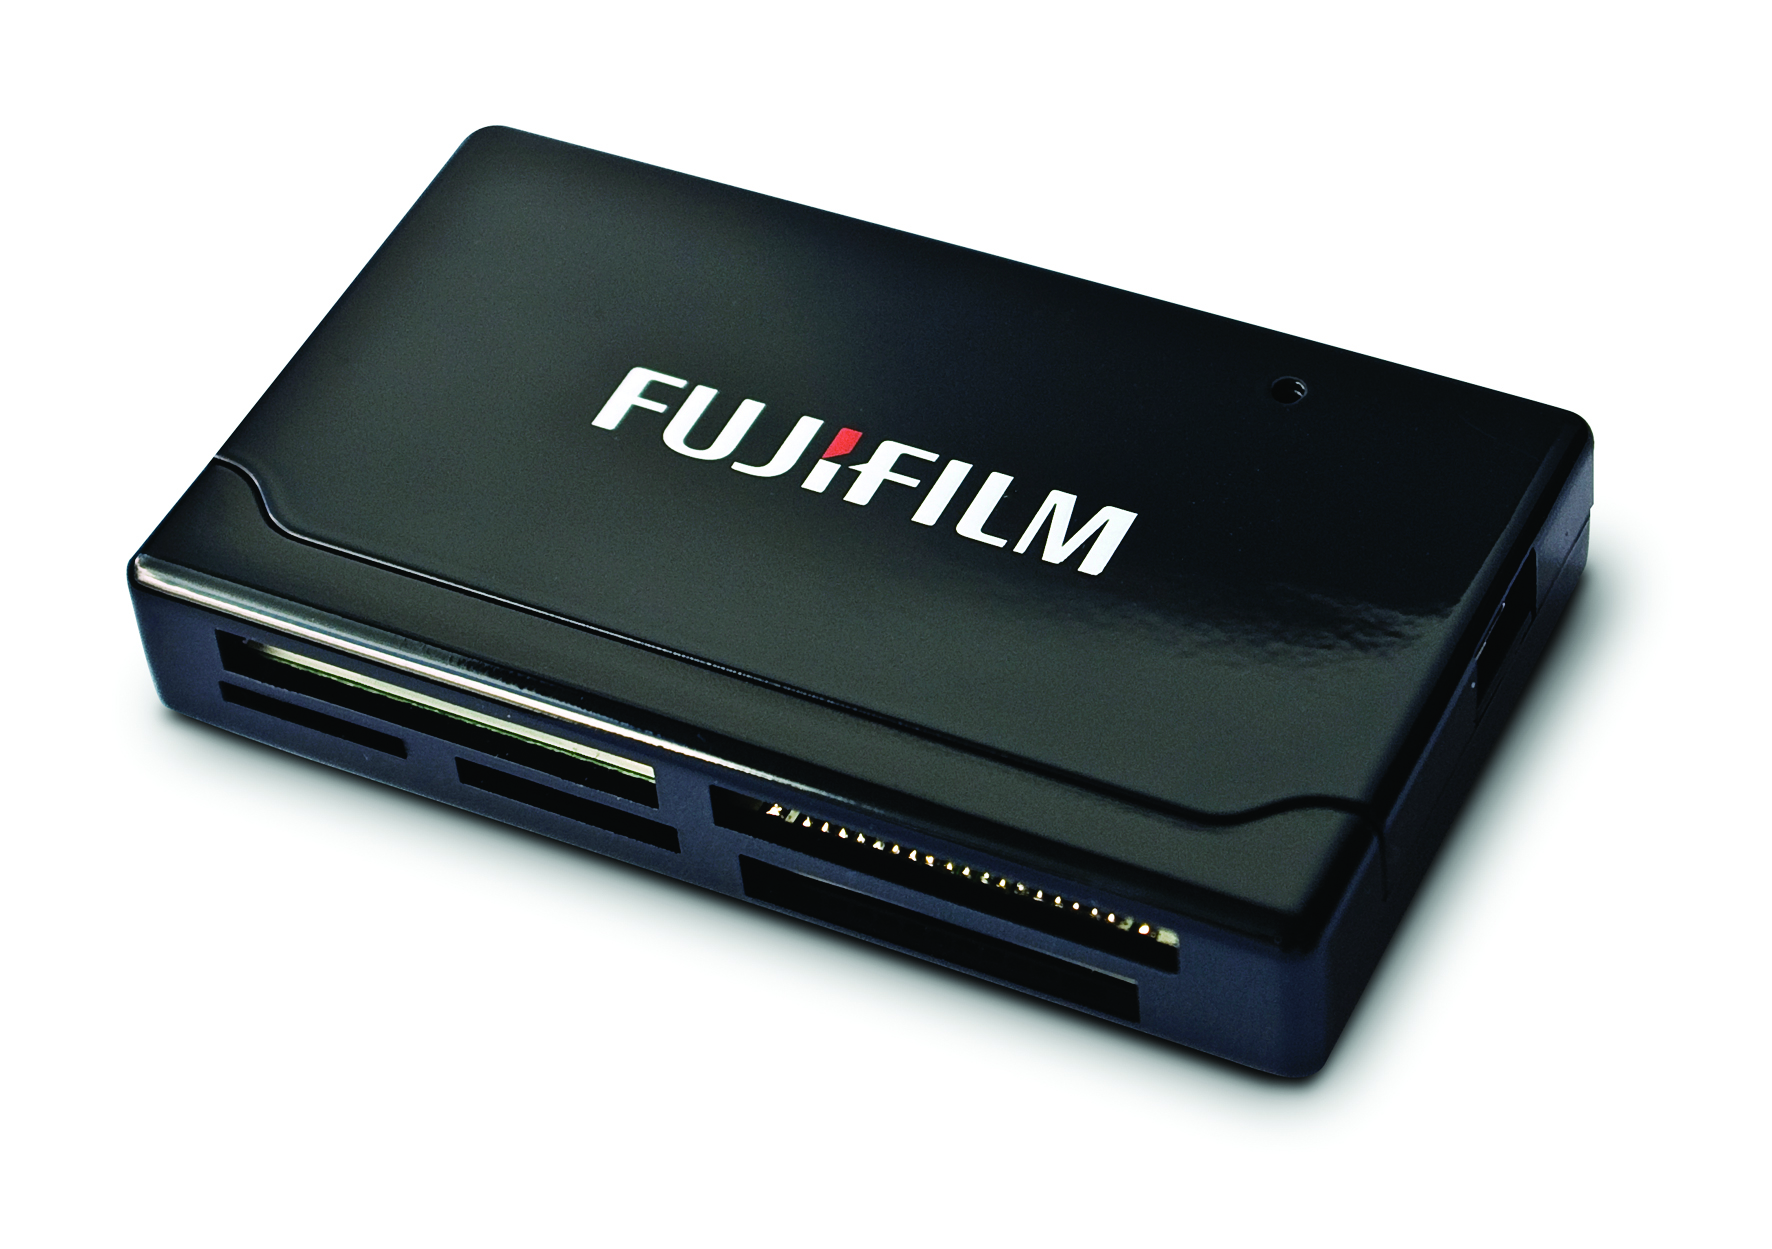 Photos - Other for Computer Fujifilm USB Multi SD Card Reader 4005751 